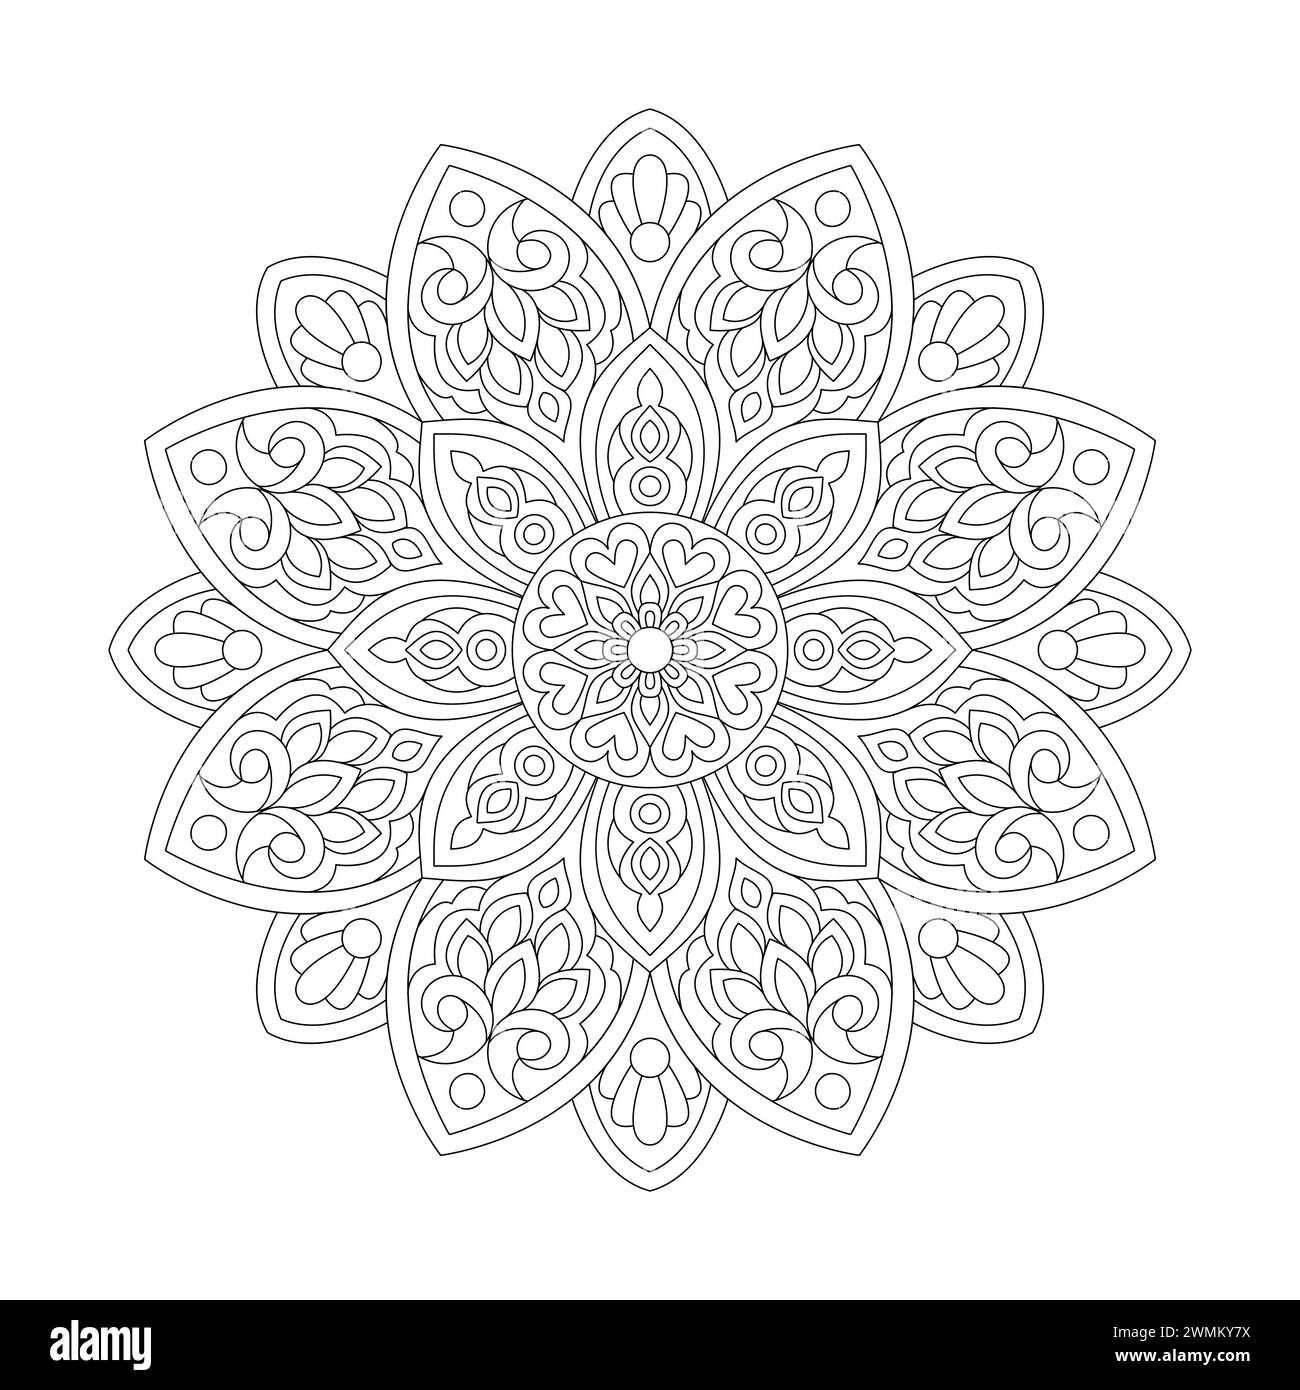 Geometric floral pattern for Coloring book page, vector file Stock Vector